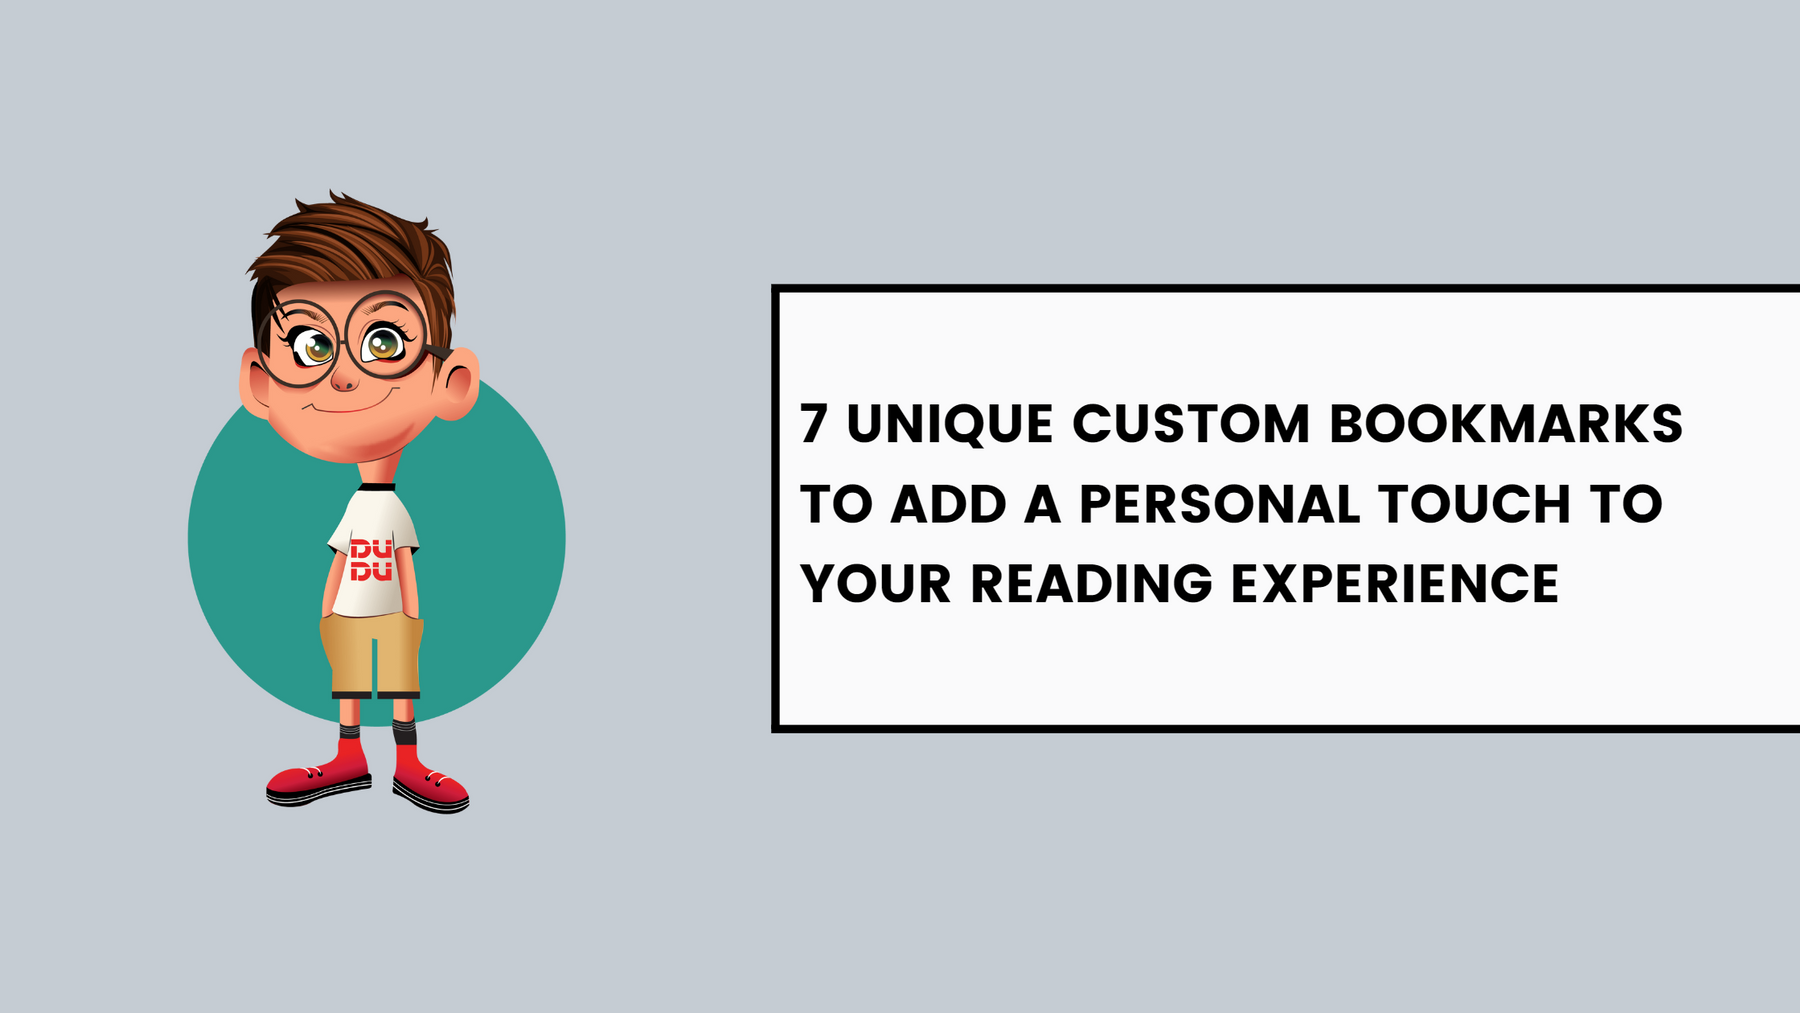 7 Unique Custom Bookmarks to Add a Personal Touch to Your Reading Experience